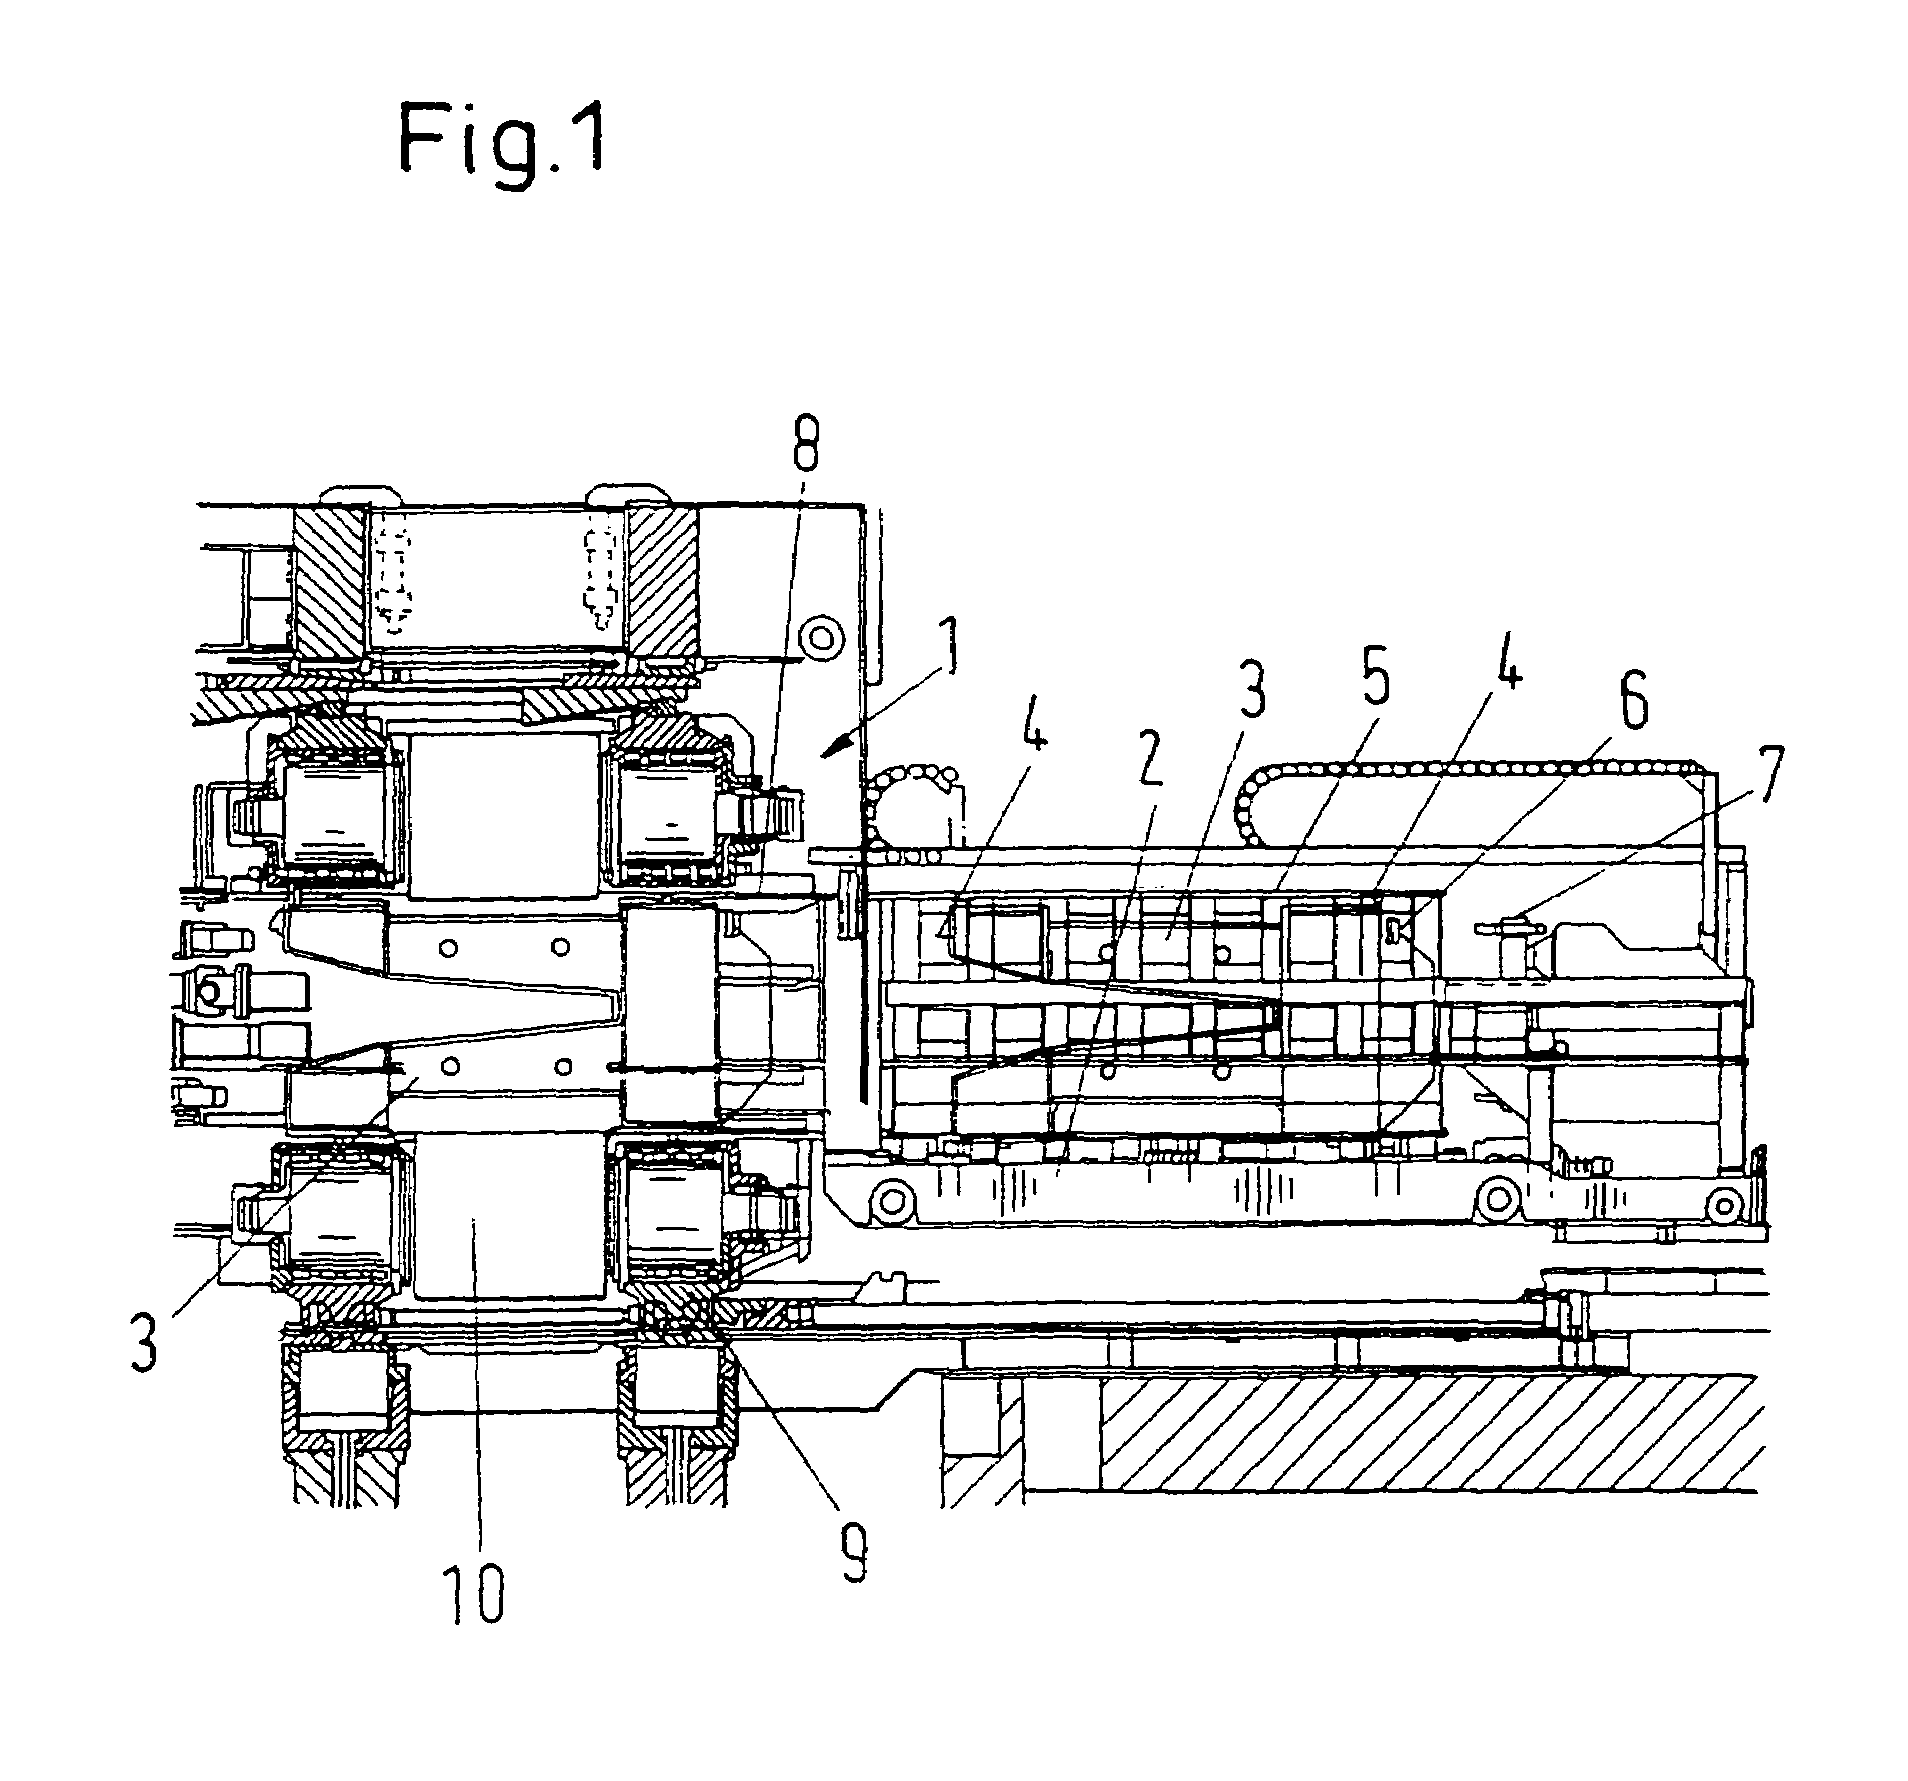 Device and working method for automatically changing the work rolls, the back-up rolls and the intermediate rolls of a single-stand or multiple-stand strip mill